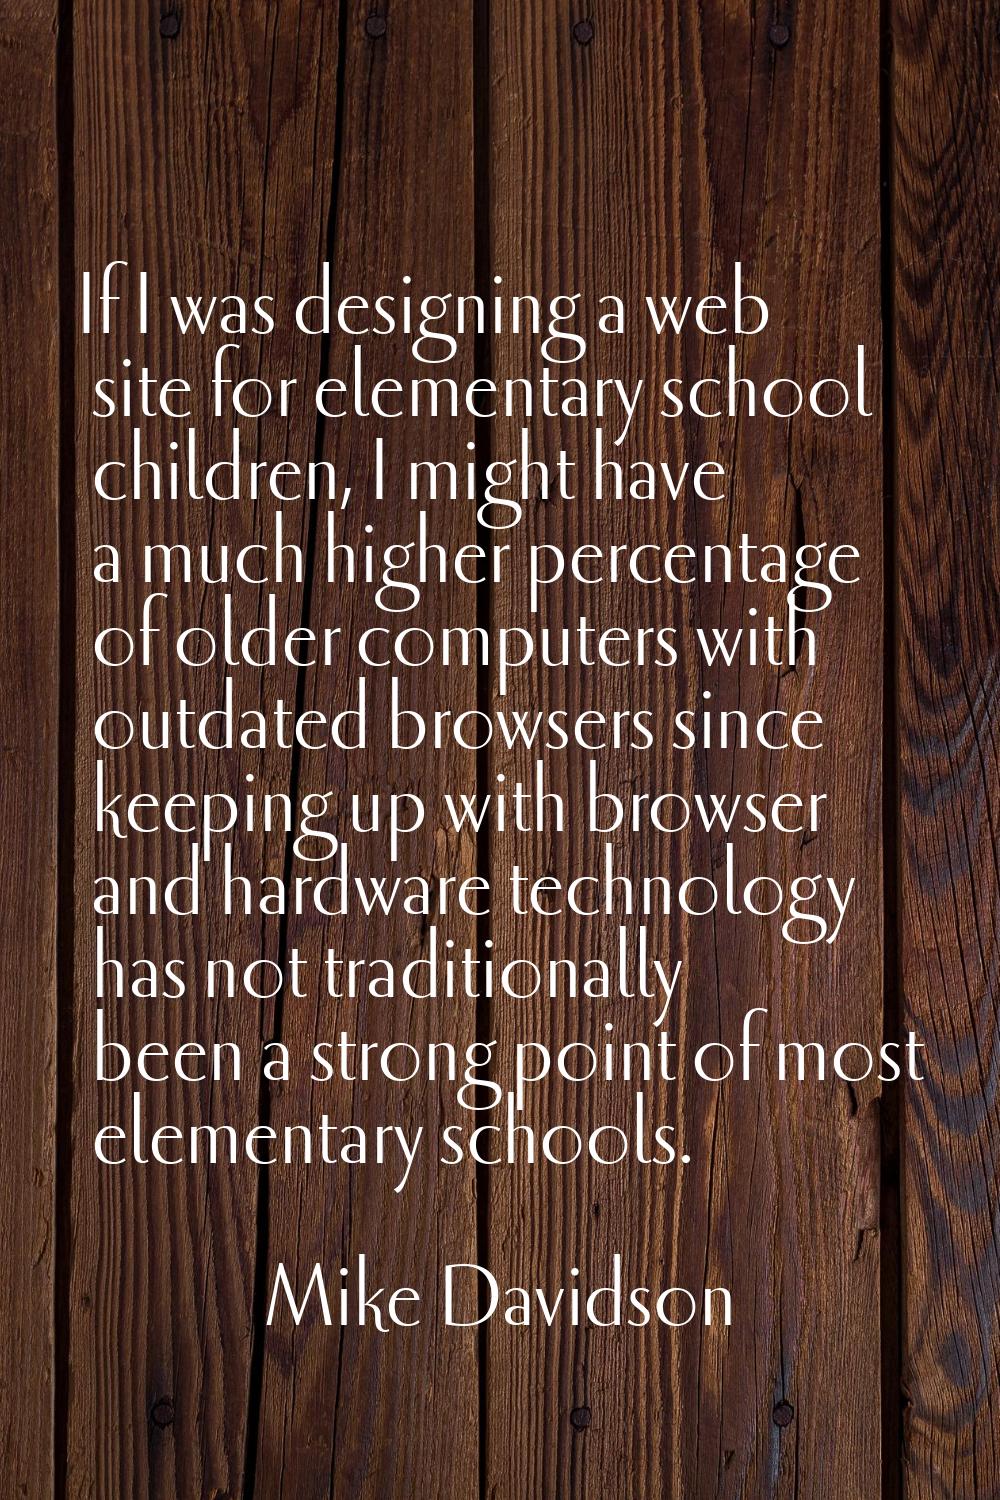 If I was designing a web site for elementary school children, I might have a much higher percentage